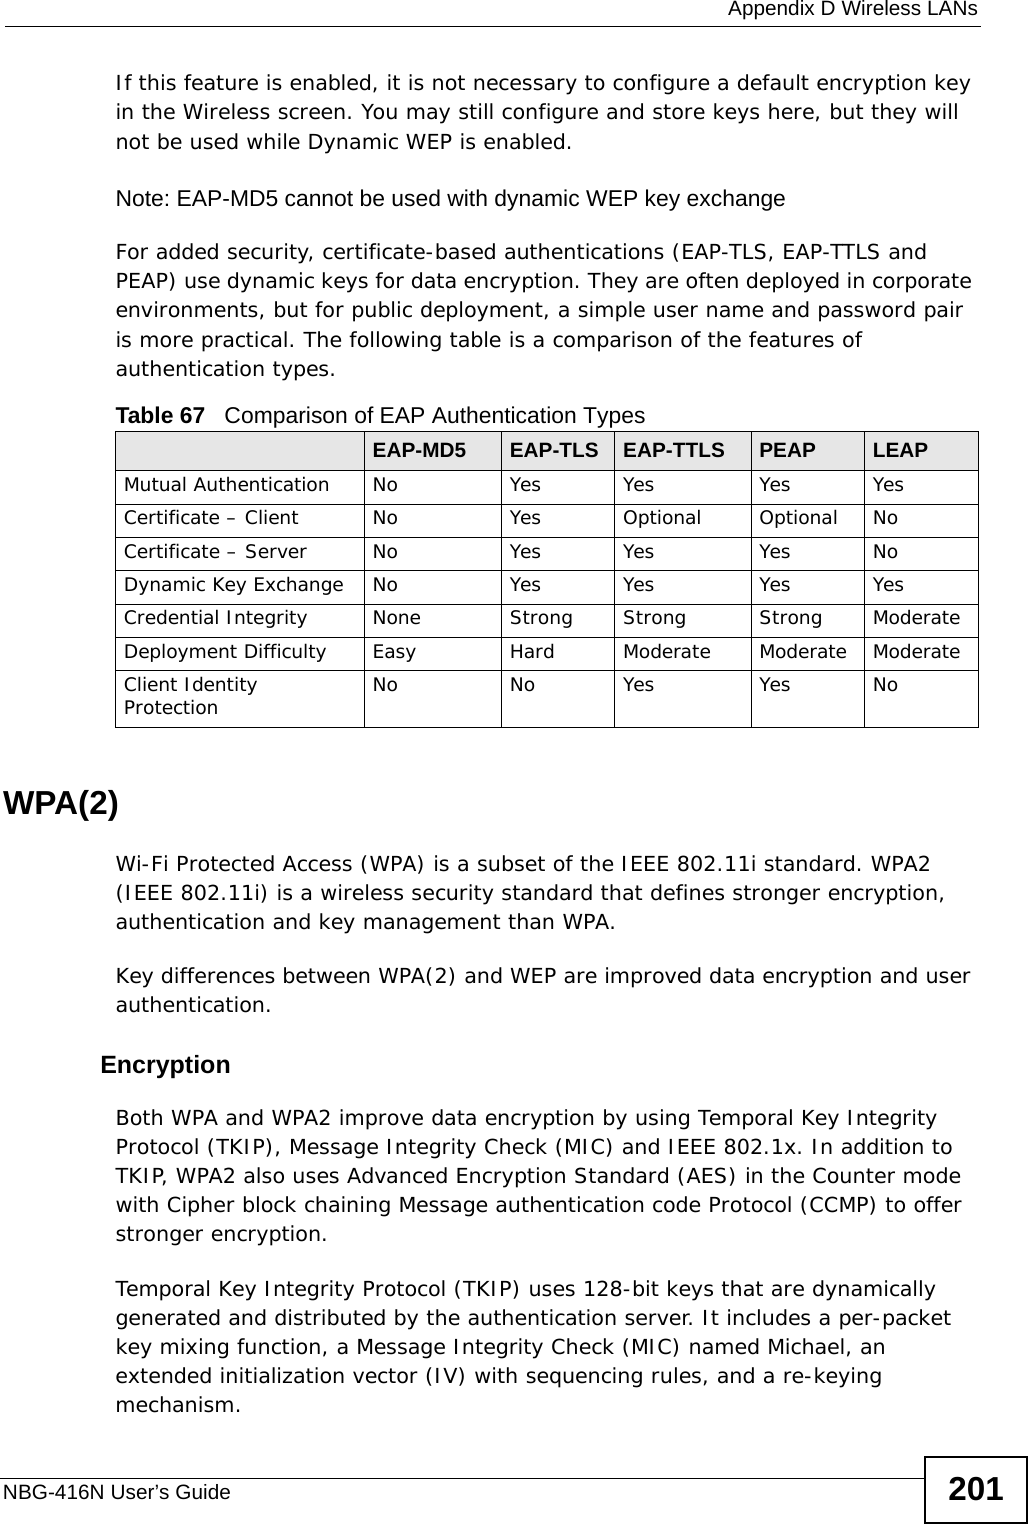  Appendix D Wireless LANsNBG-416N User’s Guide 201If this feature is enabled, it is not necessary to configure a default encryption key in the Wireless screen. You may still configure and store keys here, but they will not be used while Dynamic WEP is enabled.Note: EAP-MD5 cannot be used with dynamic WEP key exchangeFor added security, certificate-based authentications (EAP-TLS, EAP-TTLS and PEAP) use dynamic keys for data encryption. They are often deployed in corporate environments, but for public deployment, a simple user name and password pair is more practical. The following table is a comparison of the features of authentication types.WPA(2)Wi-Fi Protected Access (WPA) is a subset of the IEEE 802.11i standard. WPA2 (IEEE 802.11i) is a wireless security standard that defines stronger encryption, authentication and key management than WPA. Key differences between WPA(2) and WEP are improved data encryption and user authentication.              EncryptionBoth WPA and WPA2 improve data encryption by using Temporal Key Integrity Protocol (TKIP), Message Integrity Check (MIC) and IEEE 802.1x. In addition to TKIP, WPA2 also uses Advanced Encryption Standard (AES) in the Counter mode with Cipher block chaining Message authentication code Protocol (CCMP) to offer stronger encryption. Temporal Key Integrity Protocol (TKIP) uses 128-bit keys that are dynamically generated and distributed by the authentication server. It includes a per-packet key mixing function, a Message Integrity Check (MIC) named Michael, an extended initialization vector (IV) with sequencing rules, and a re-keying mechanism.Table 67   Comparison of EAP Authentication TypesEAP-MD5 EAP-TLS EAP-TTLS PEAP LEAPMutual Authentication No Yes Yes Yes YesCertificate – Client No Yes Optional Optional NoCertificate – Server No Yes Yes Yes NoDynamic Key Exchange No Yes Yes Yes YesCredential Integrity None Strong Strong Strong ModerateDeployment Difficulty Easy Hard Moderate Moderate ModerateClient Identity Protection No No Yes Yes No